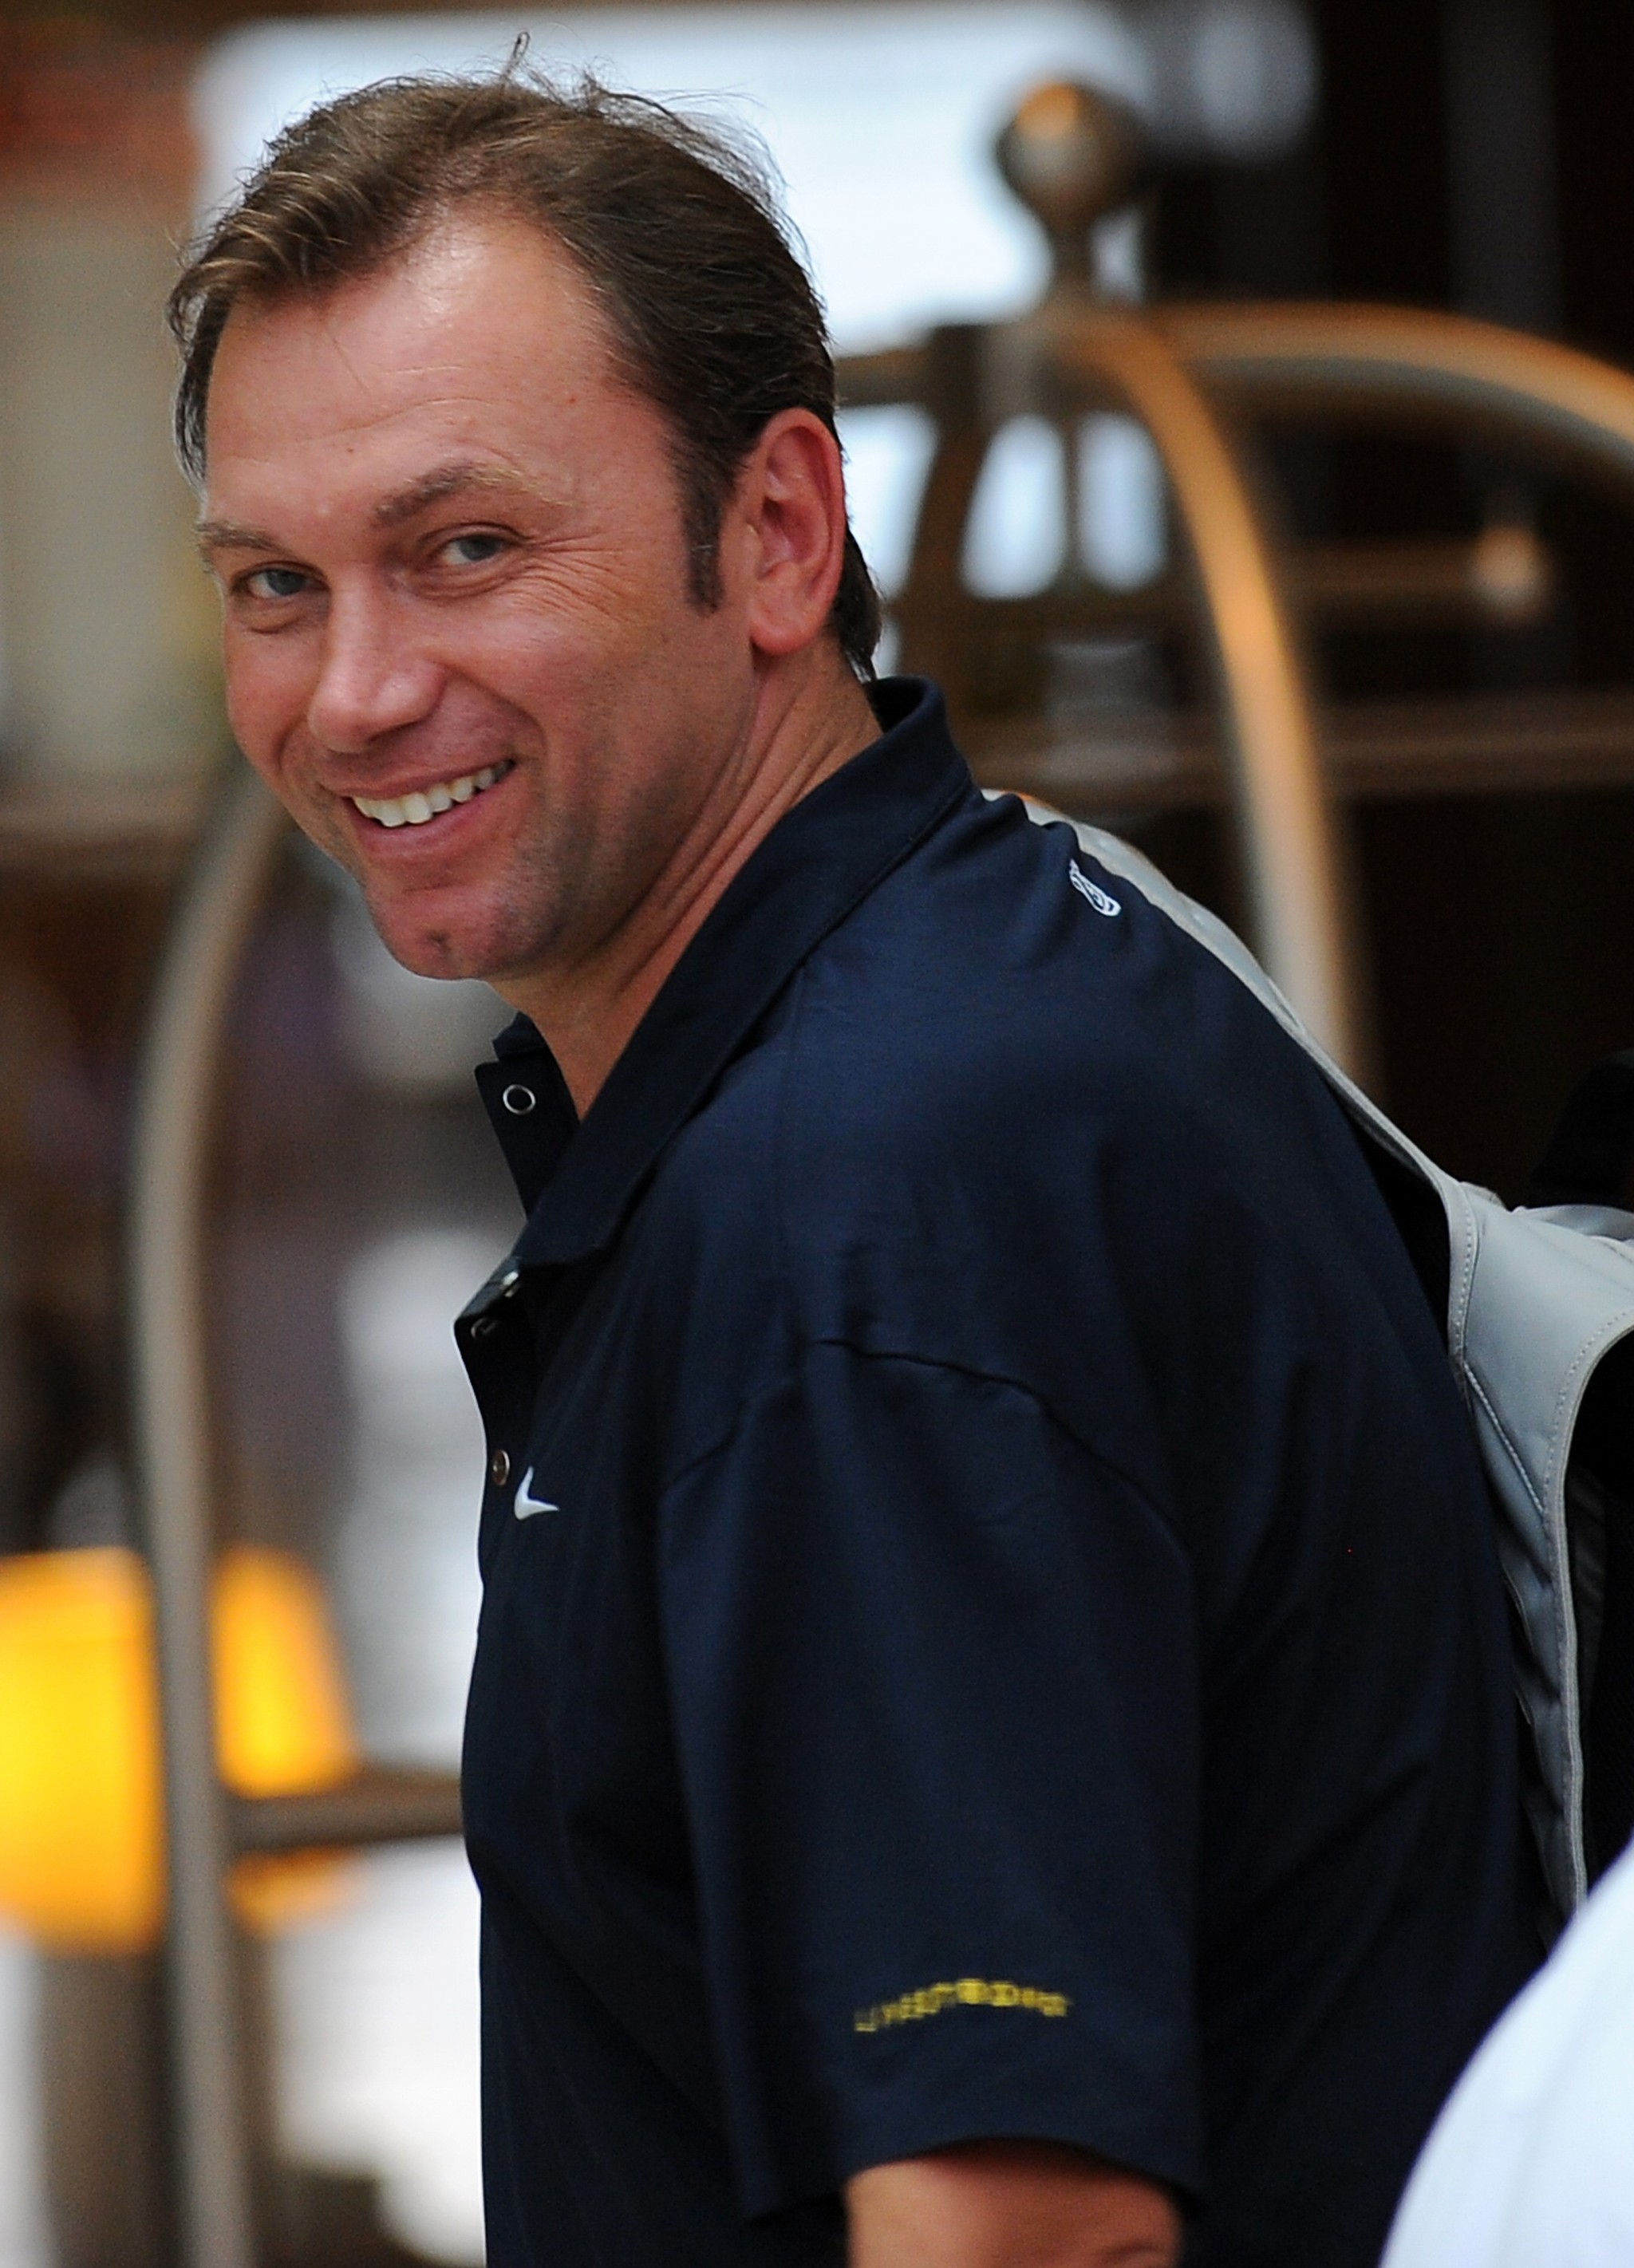 Kazakh cycling team Astana (AST)s manager Johan lt;HIT gt;Bruyneel lt;/HIT gt; arrives at the hotel hosting his cycling team on July 1, 2009 in the principalty of Monaco, three days ahead of the start of the 96th edition of the Tour de France cycling race. 2009 Tour de France will cover 21 stages (10 flat stages, 8 mountains, 2 individual time trials as well as one team time trial) before it ends 3.500 km later in Paris on July 26. AFP PHOTO LIONEL BONAVENTURE